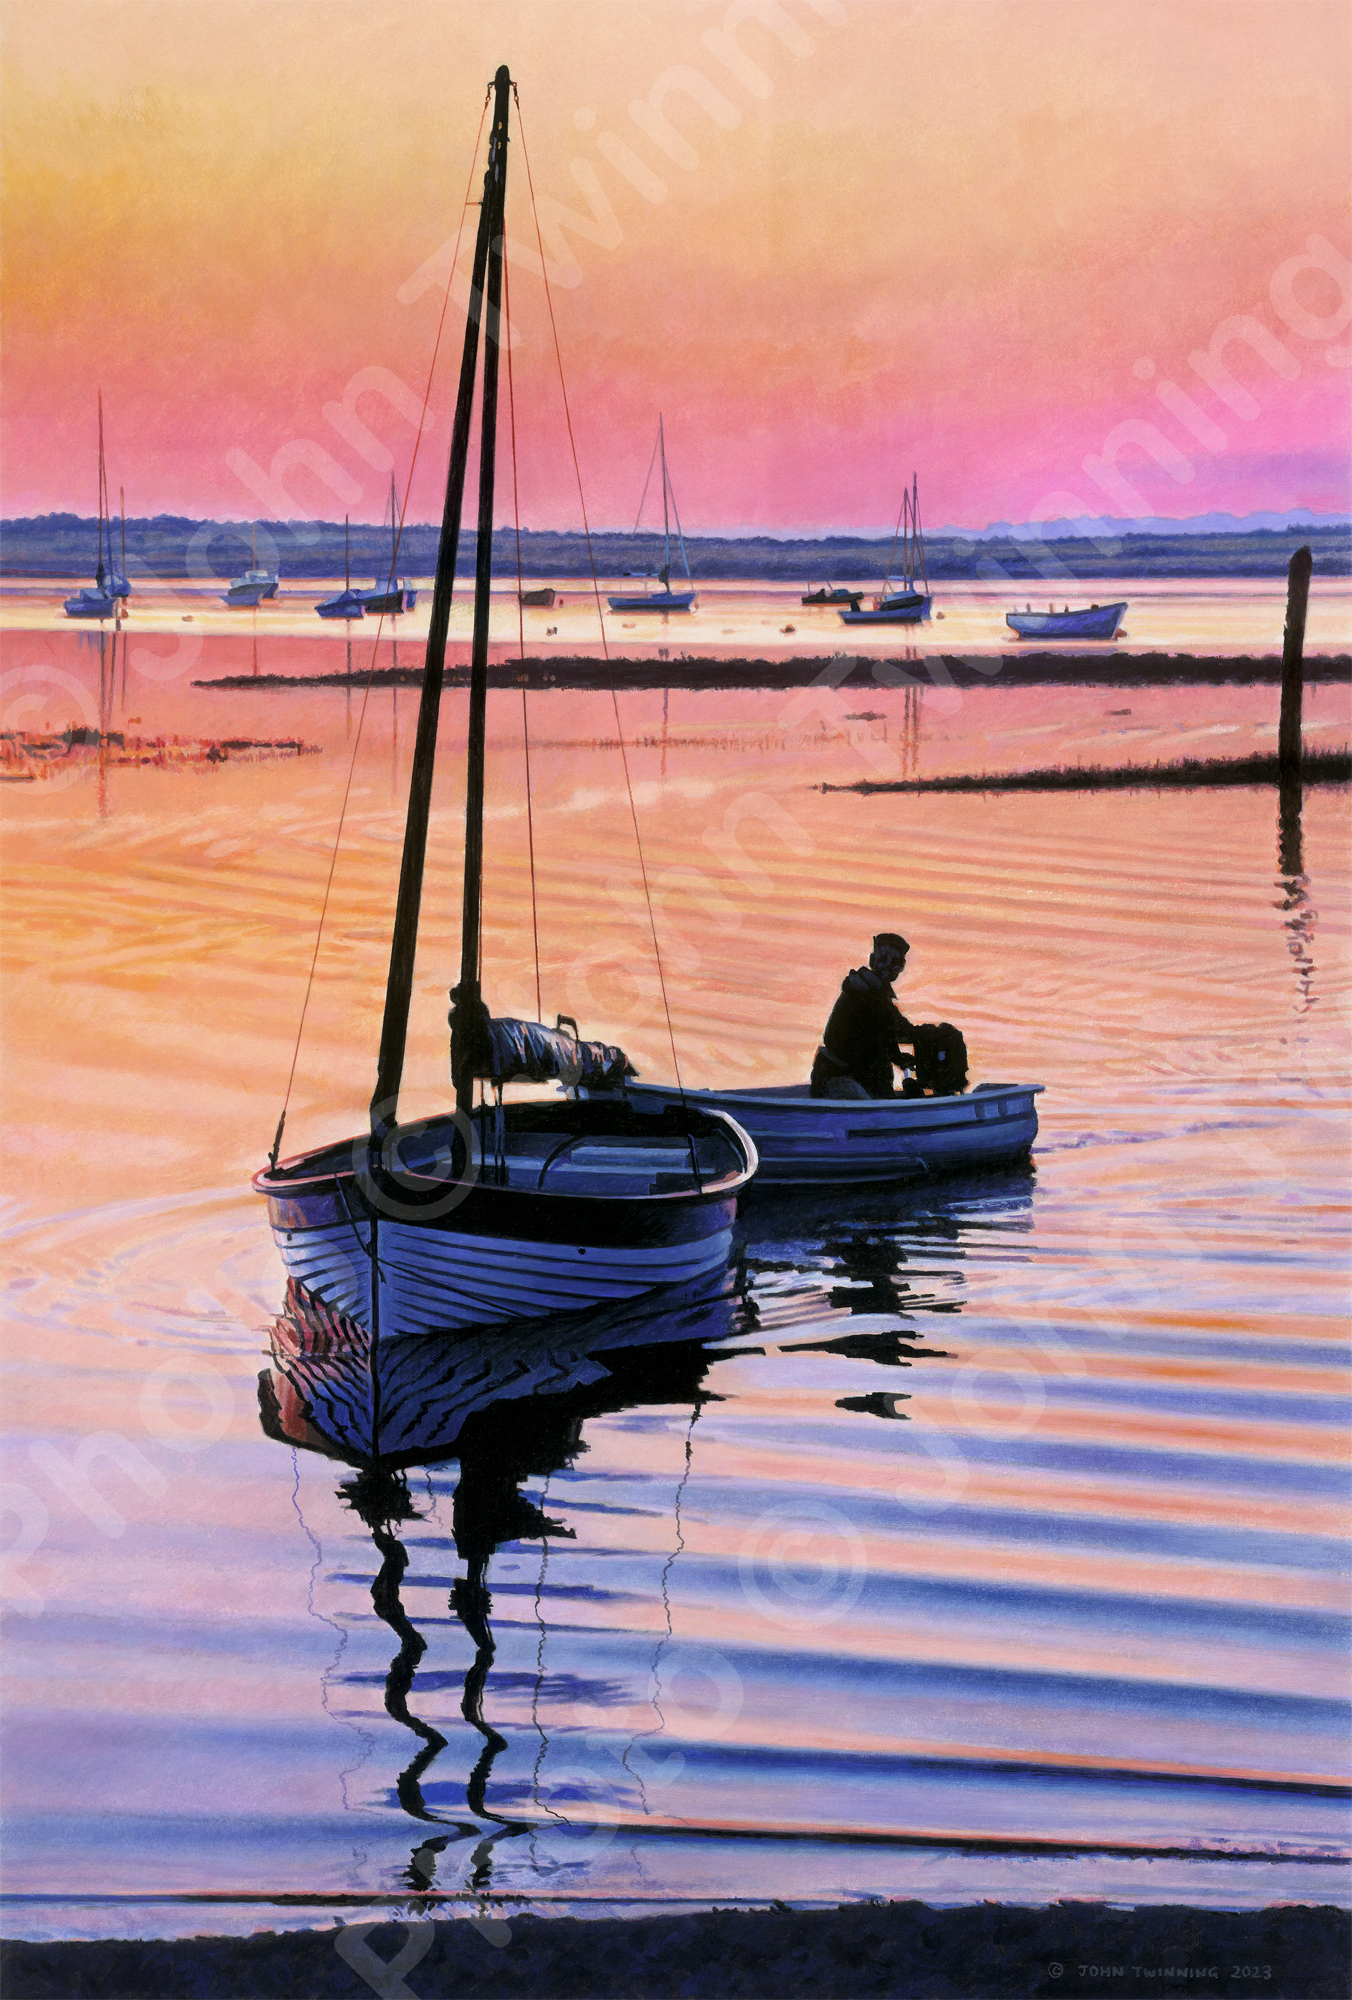 ‘Bringing Her Safely Home’ – art print from a marine/maritime watercolour painting of boats at brancaster staithe, norfolk